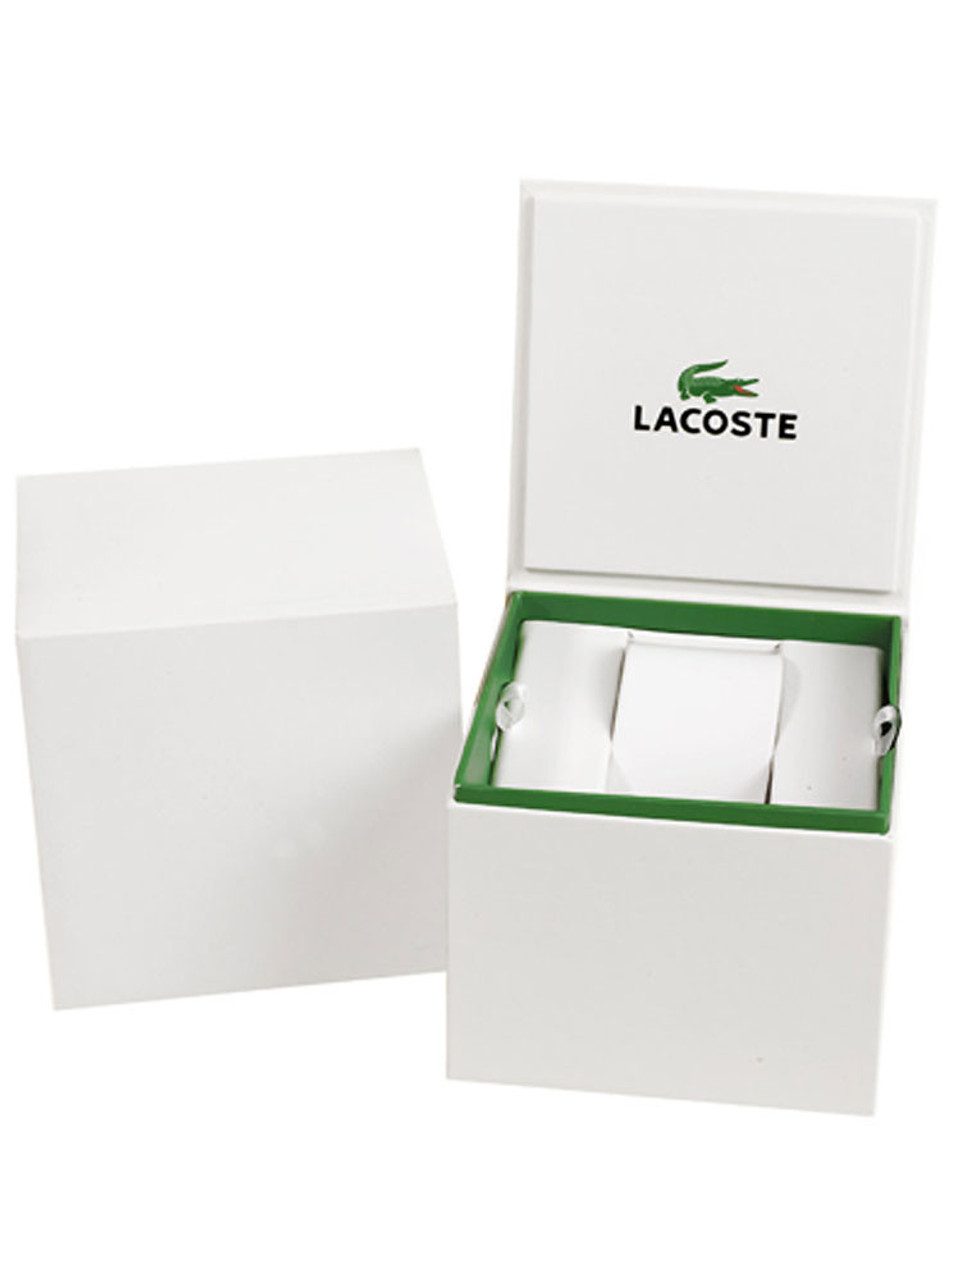 Lacoste 2011176 Replay Men's 44mm 5ATM - owlica | Genuine Watches